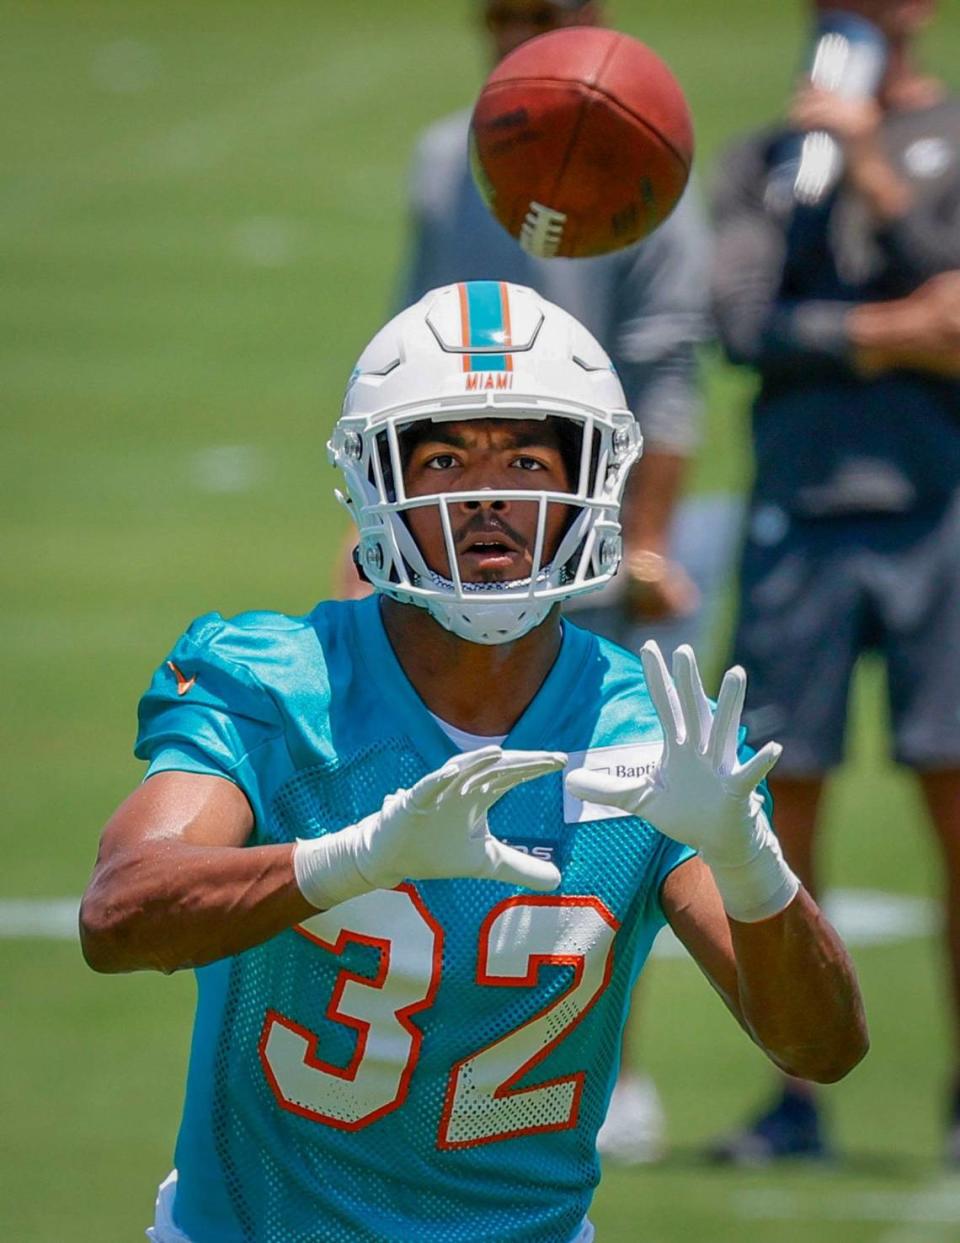 Miami Dolphins safety Patrick McMorris catches the ball during practice at the Baptist Health Training Complex in Miami Gardens, Florida.